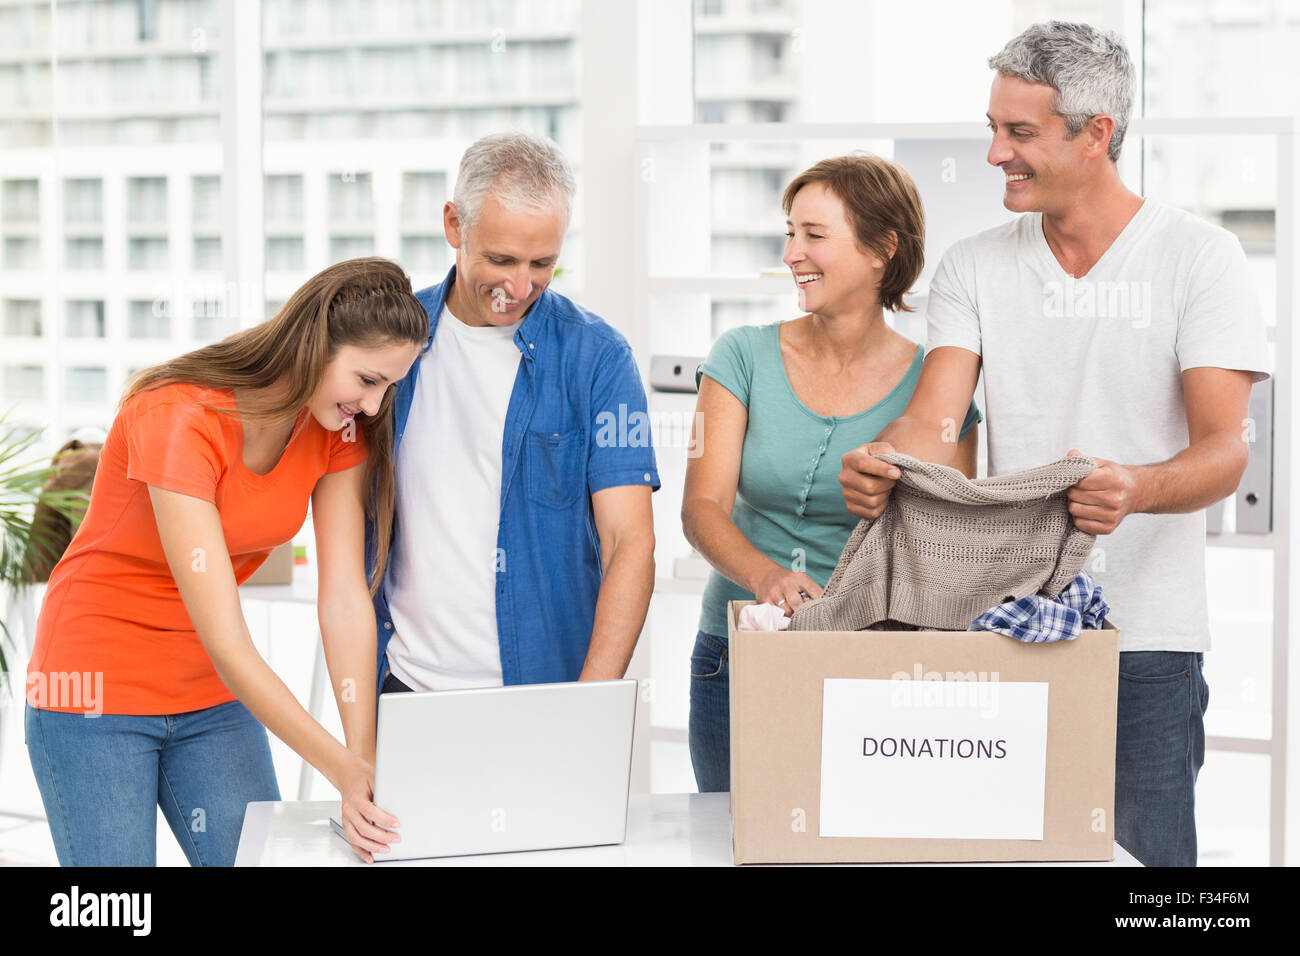 Casual business people sorting donations Stock Photo